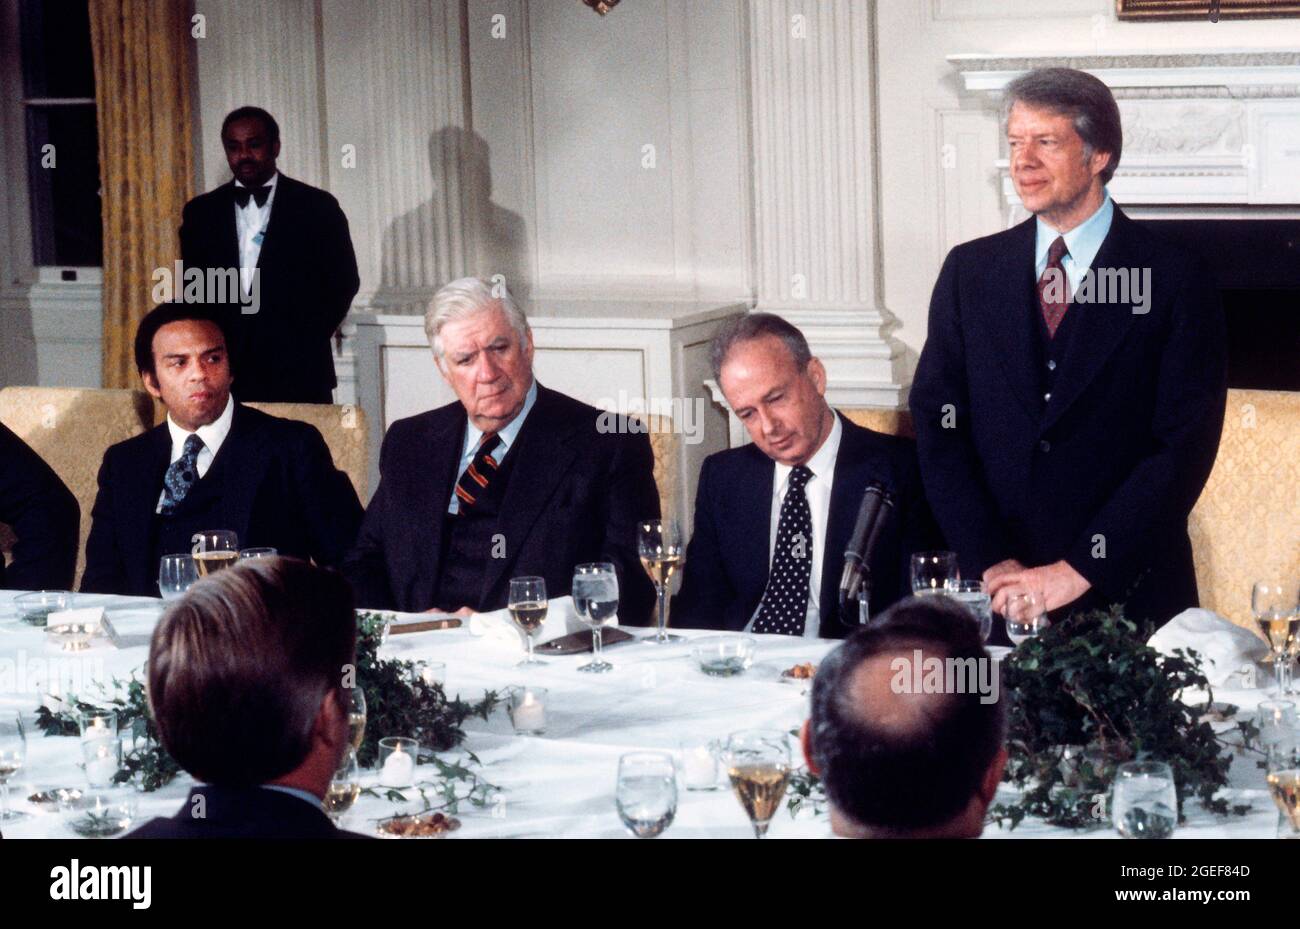 United States President Jimmy Carter, right, offers remarks at a working dinner in honor of Prime Minister Yitzhak Rabin of Israel, right center, in the State Dining Room of the White House in Washington, DC on Monday, March 7, 1977. Looking on is Speaker of the US House of Representatives Tip ONeill (Democrat of Massachusetts), left center, and US Ambassador to the United Nations Andrew Young. Credit: Benjamin E. 'Gene' Forte/CNP Stock Photo